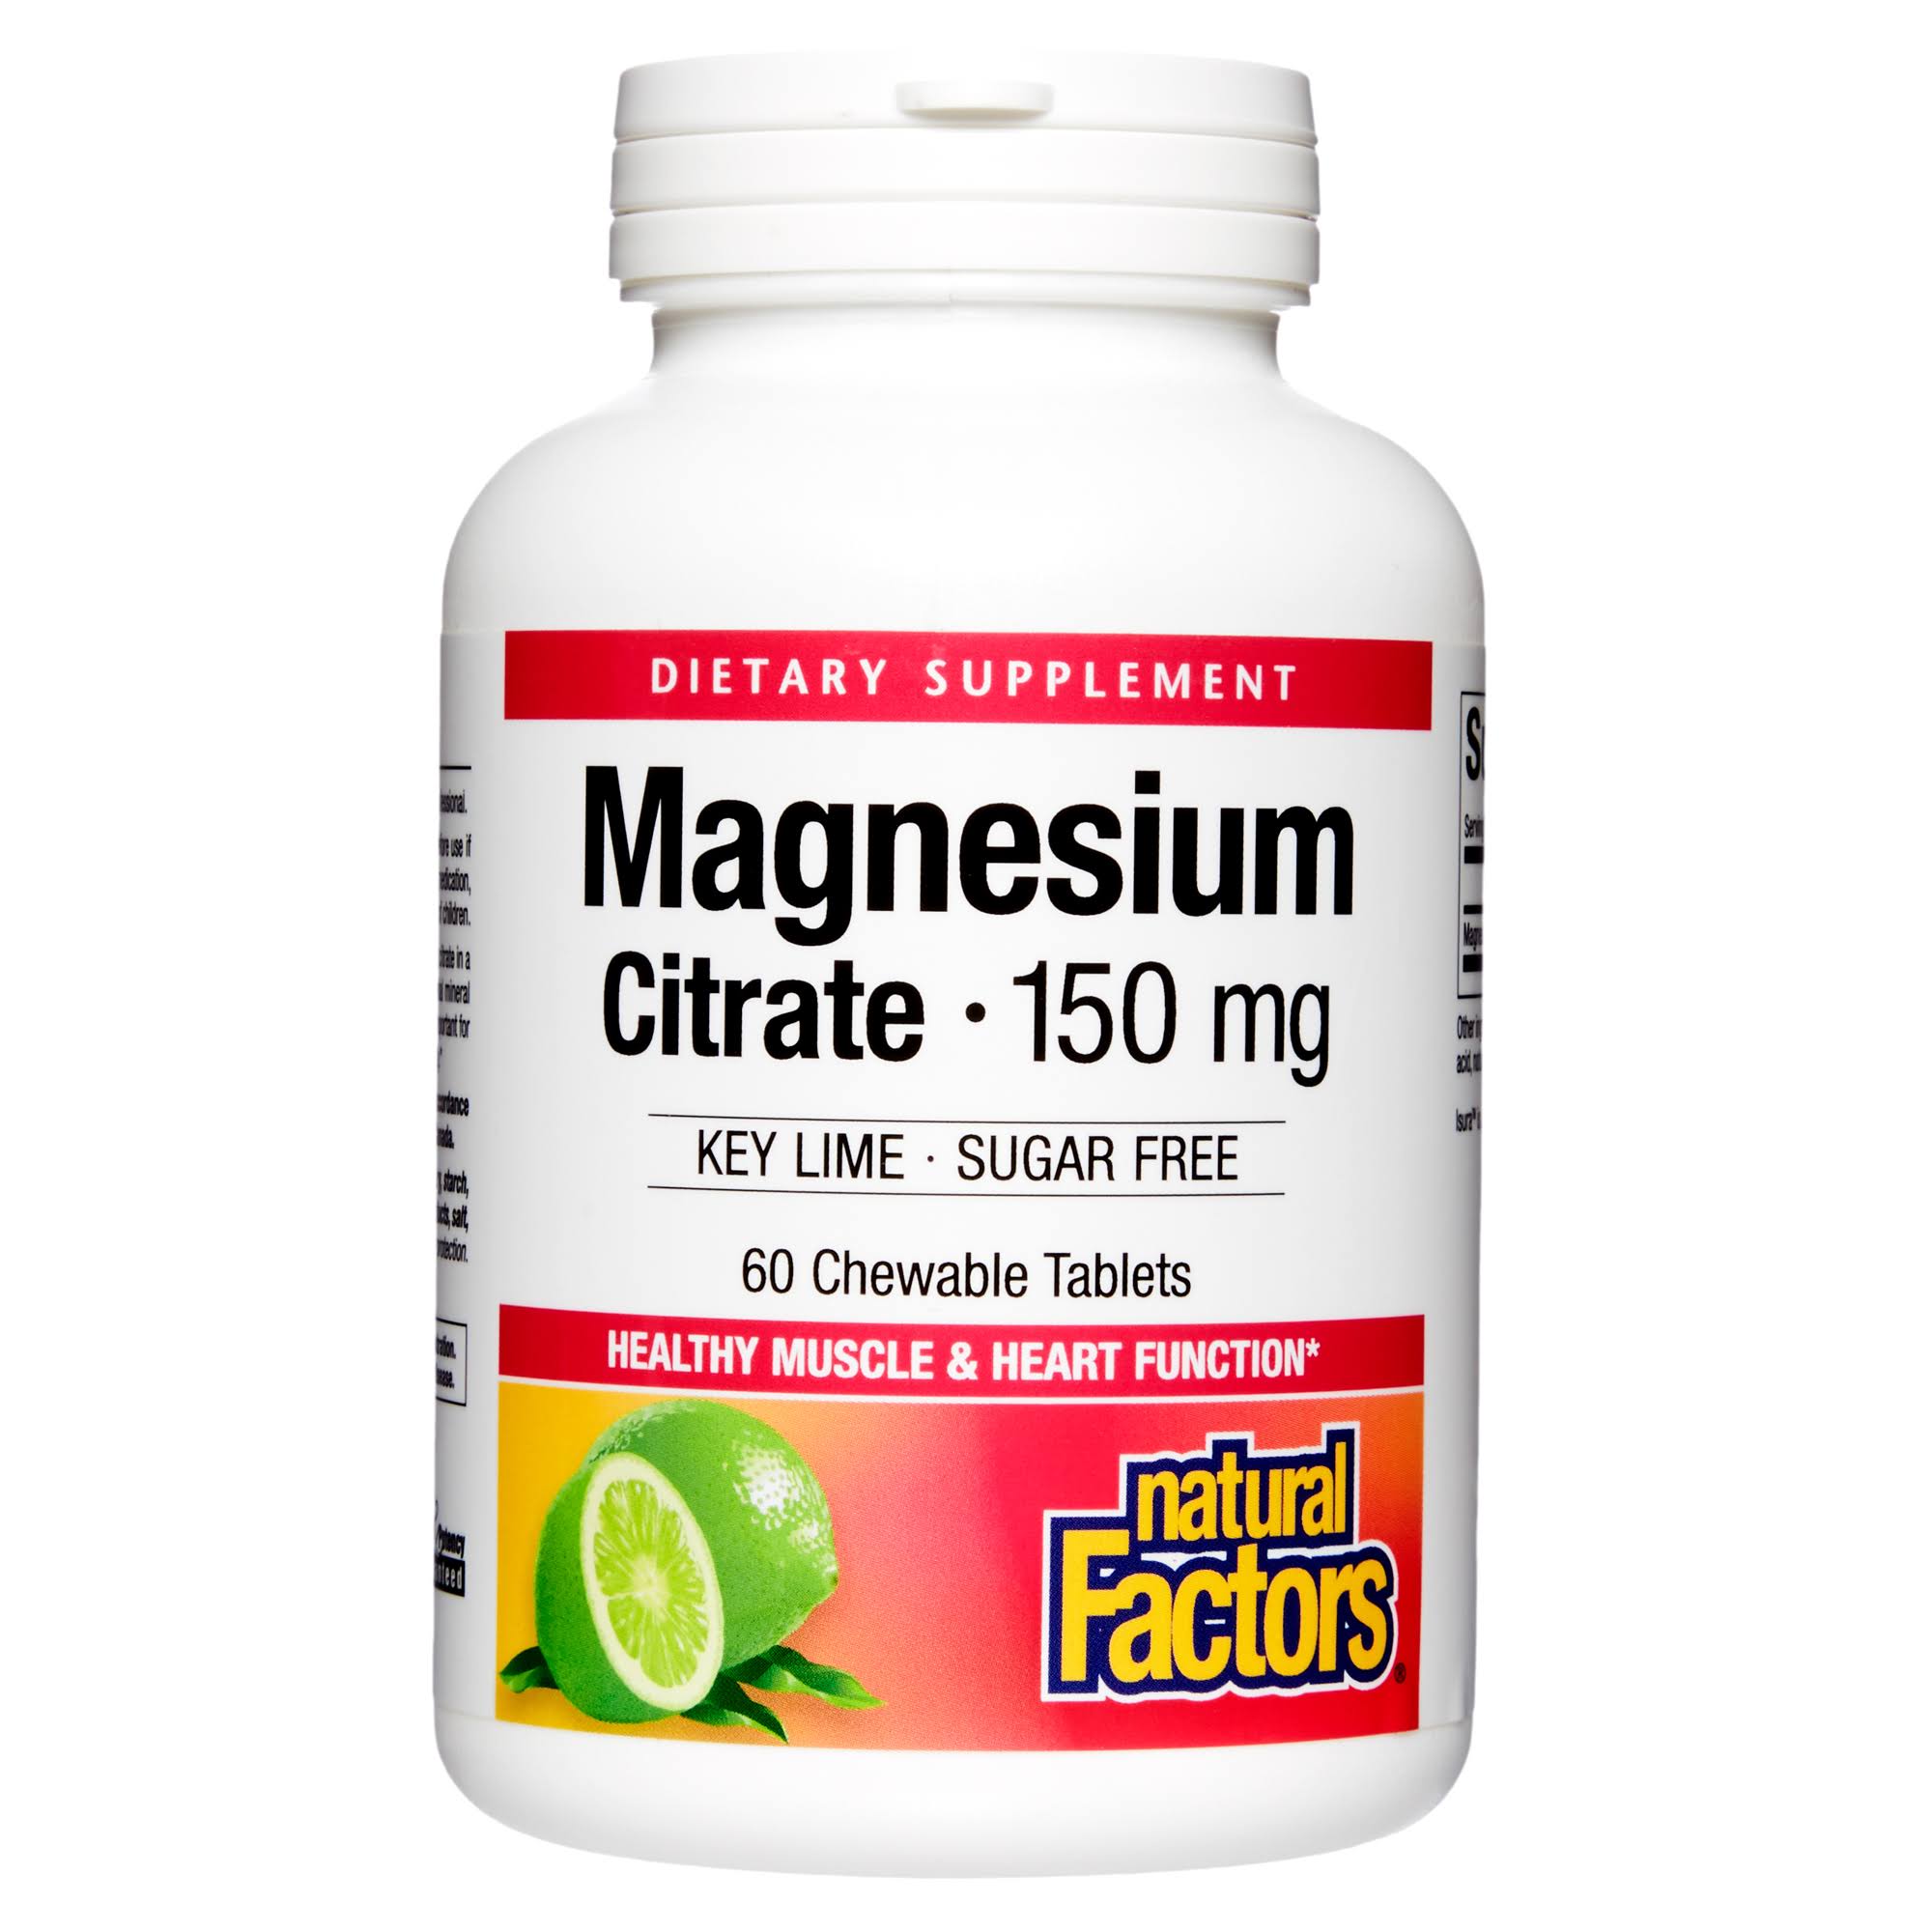 Natural Factors Magnesium Citrate Key Lime 150 MG 60 Chewable Tablets